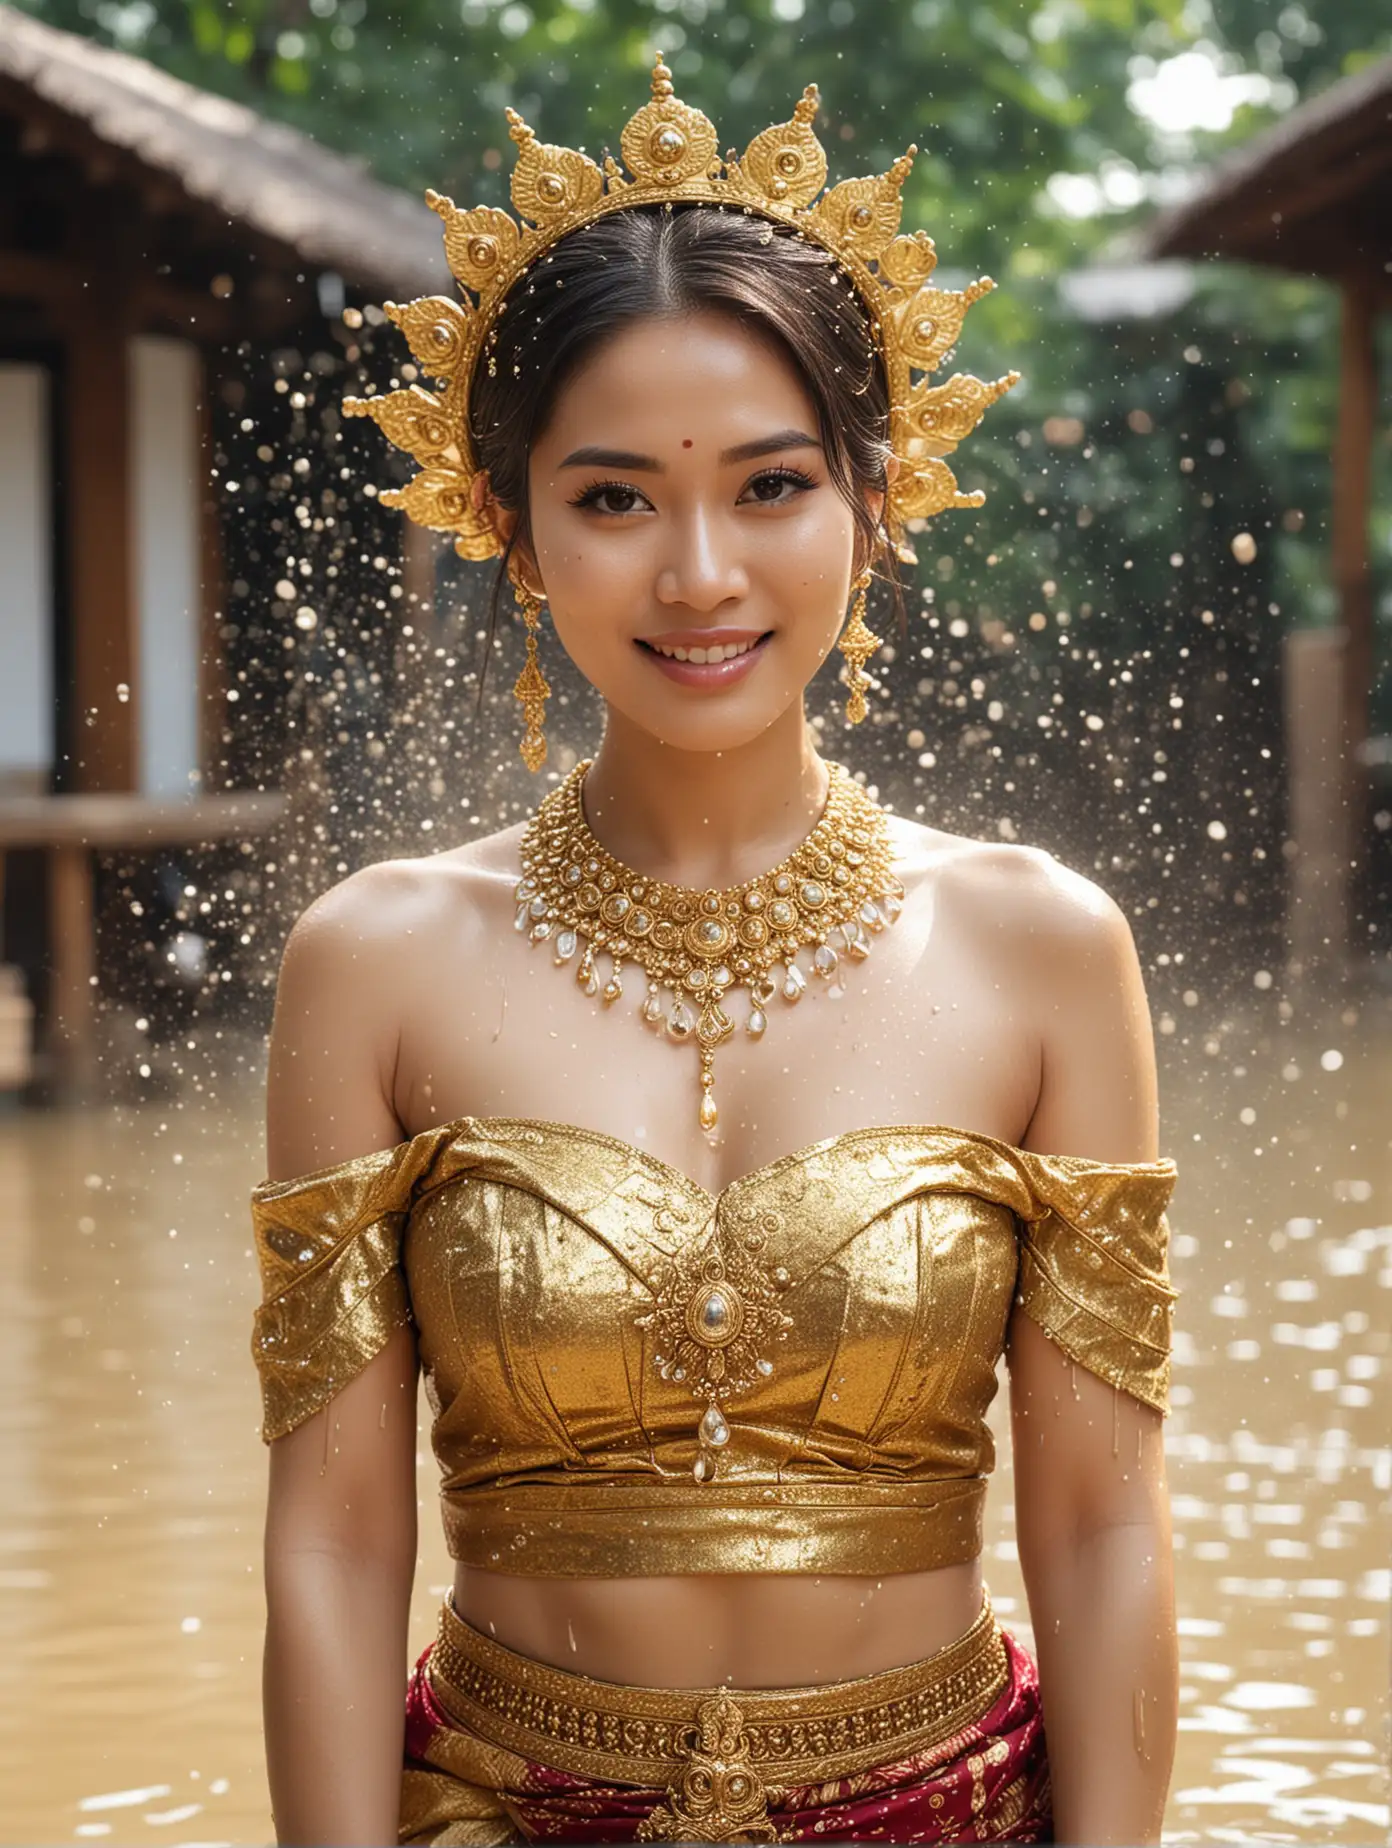 Thai Beautiful woman , in traditional Thai dress，gold accessories，exquisite facial features, facing the camera, scene during Songkran Festival, splashing water action, full body photo